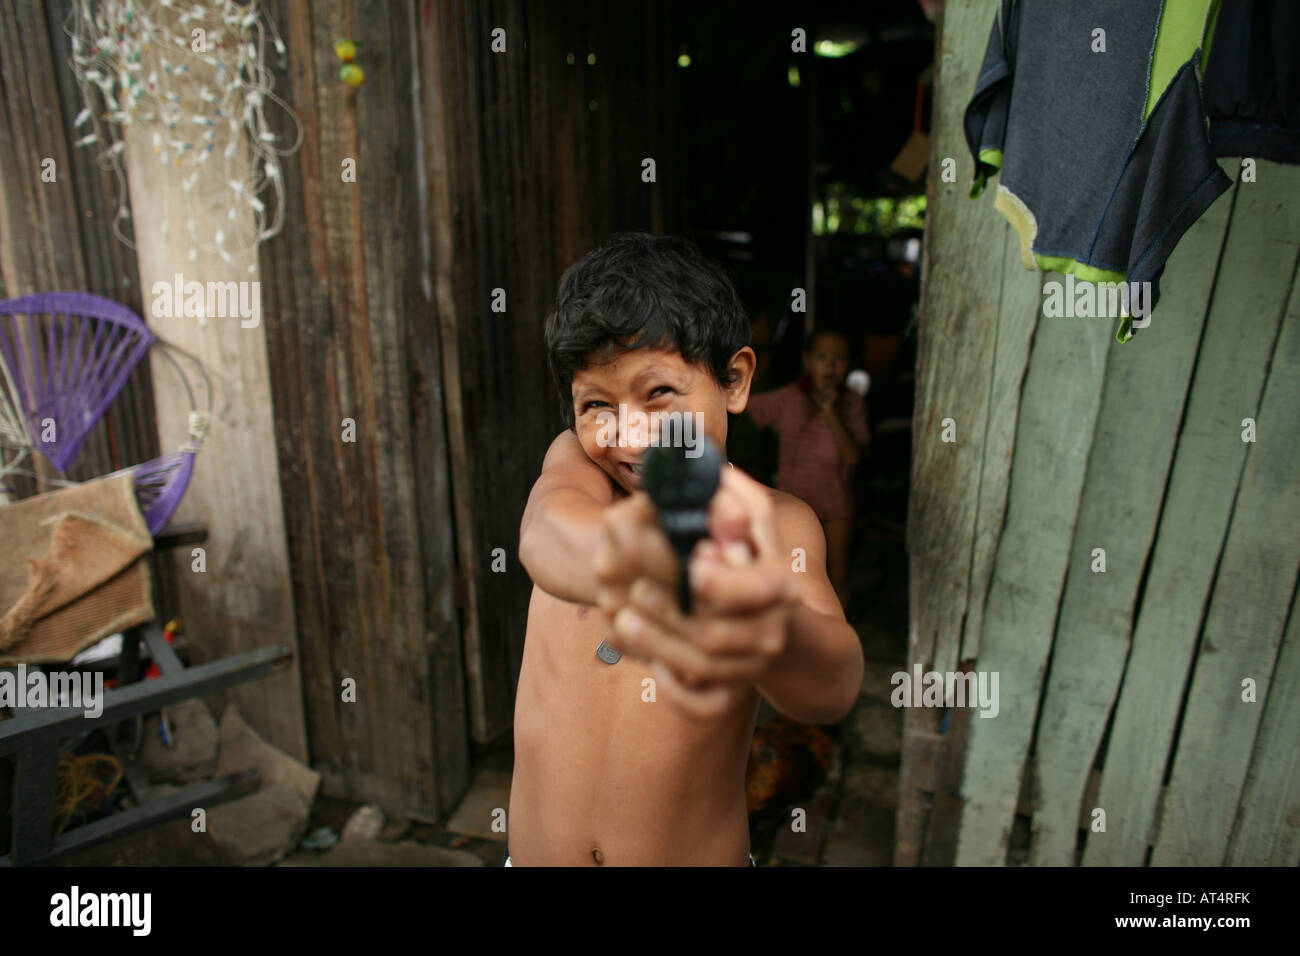 Children joining local gangs who become extremely violent Stock Photo